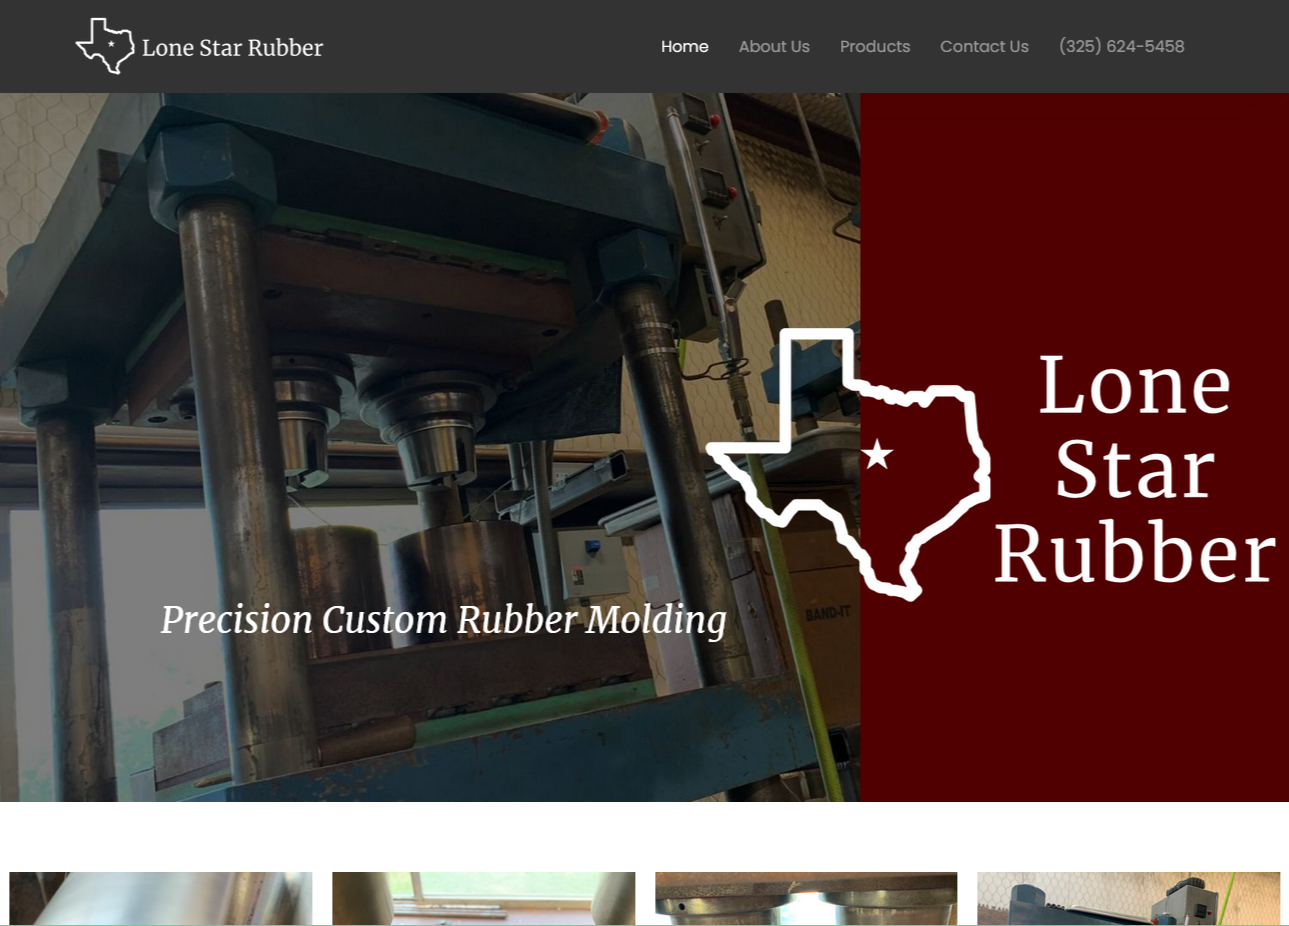 Lone Star Rubber